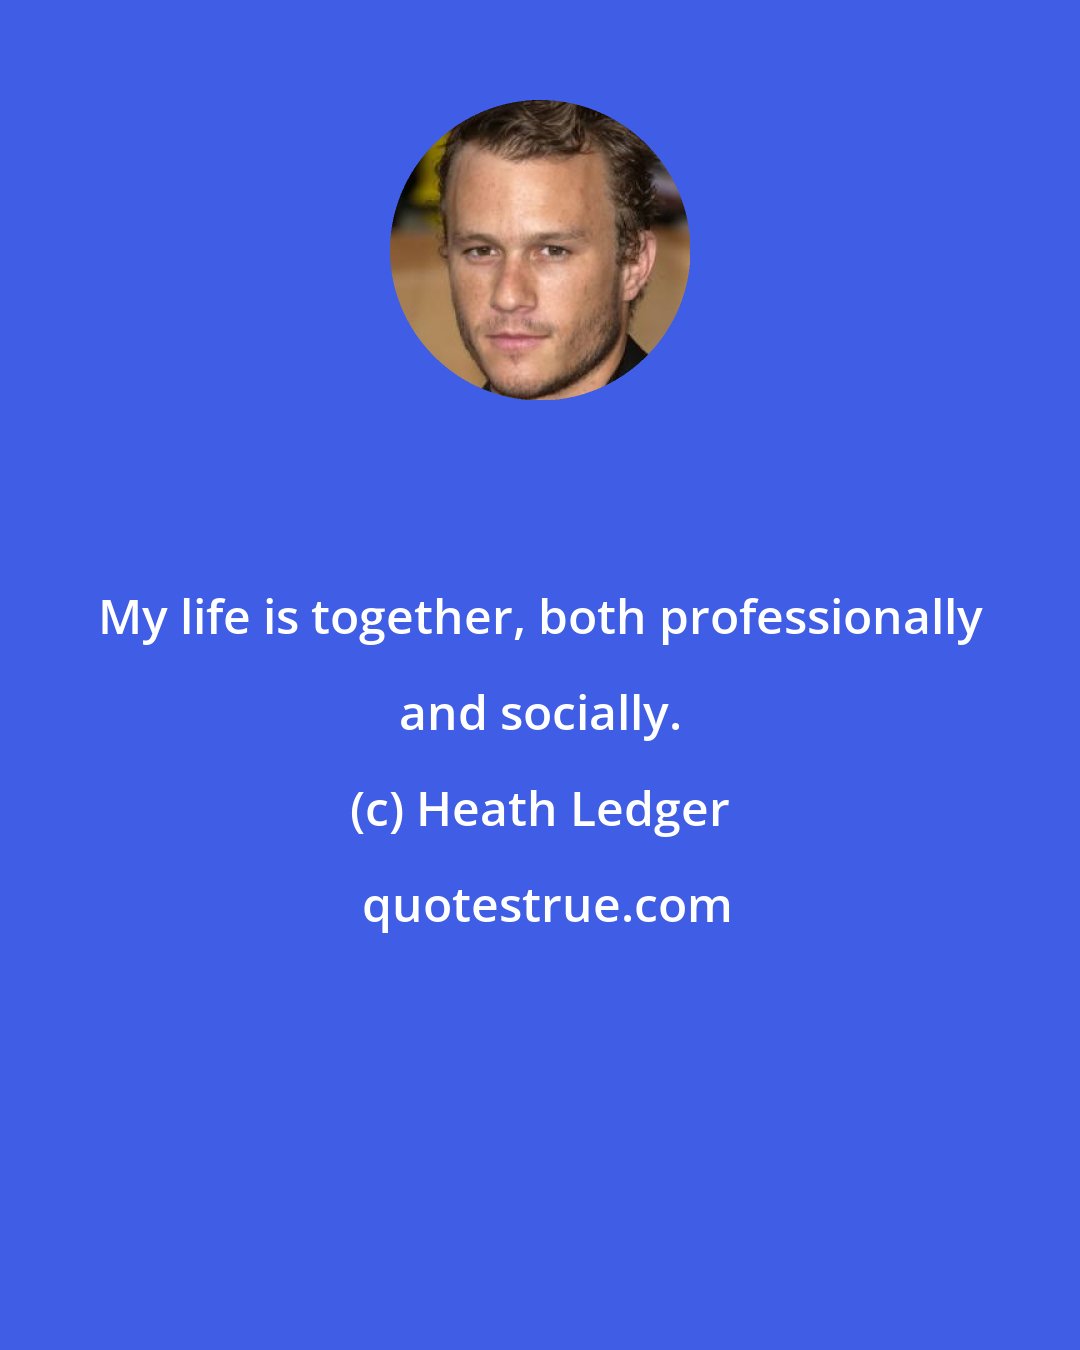 Heath Ledger: My life is together, both professionally and socially.